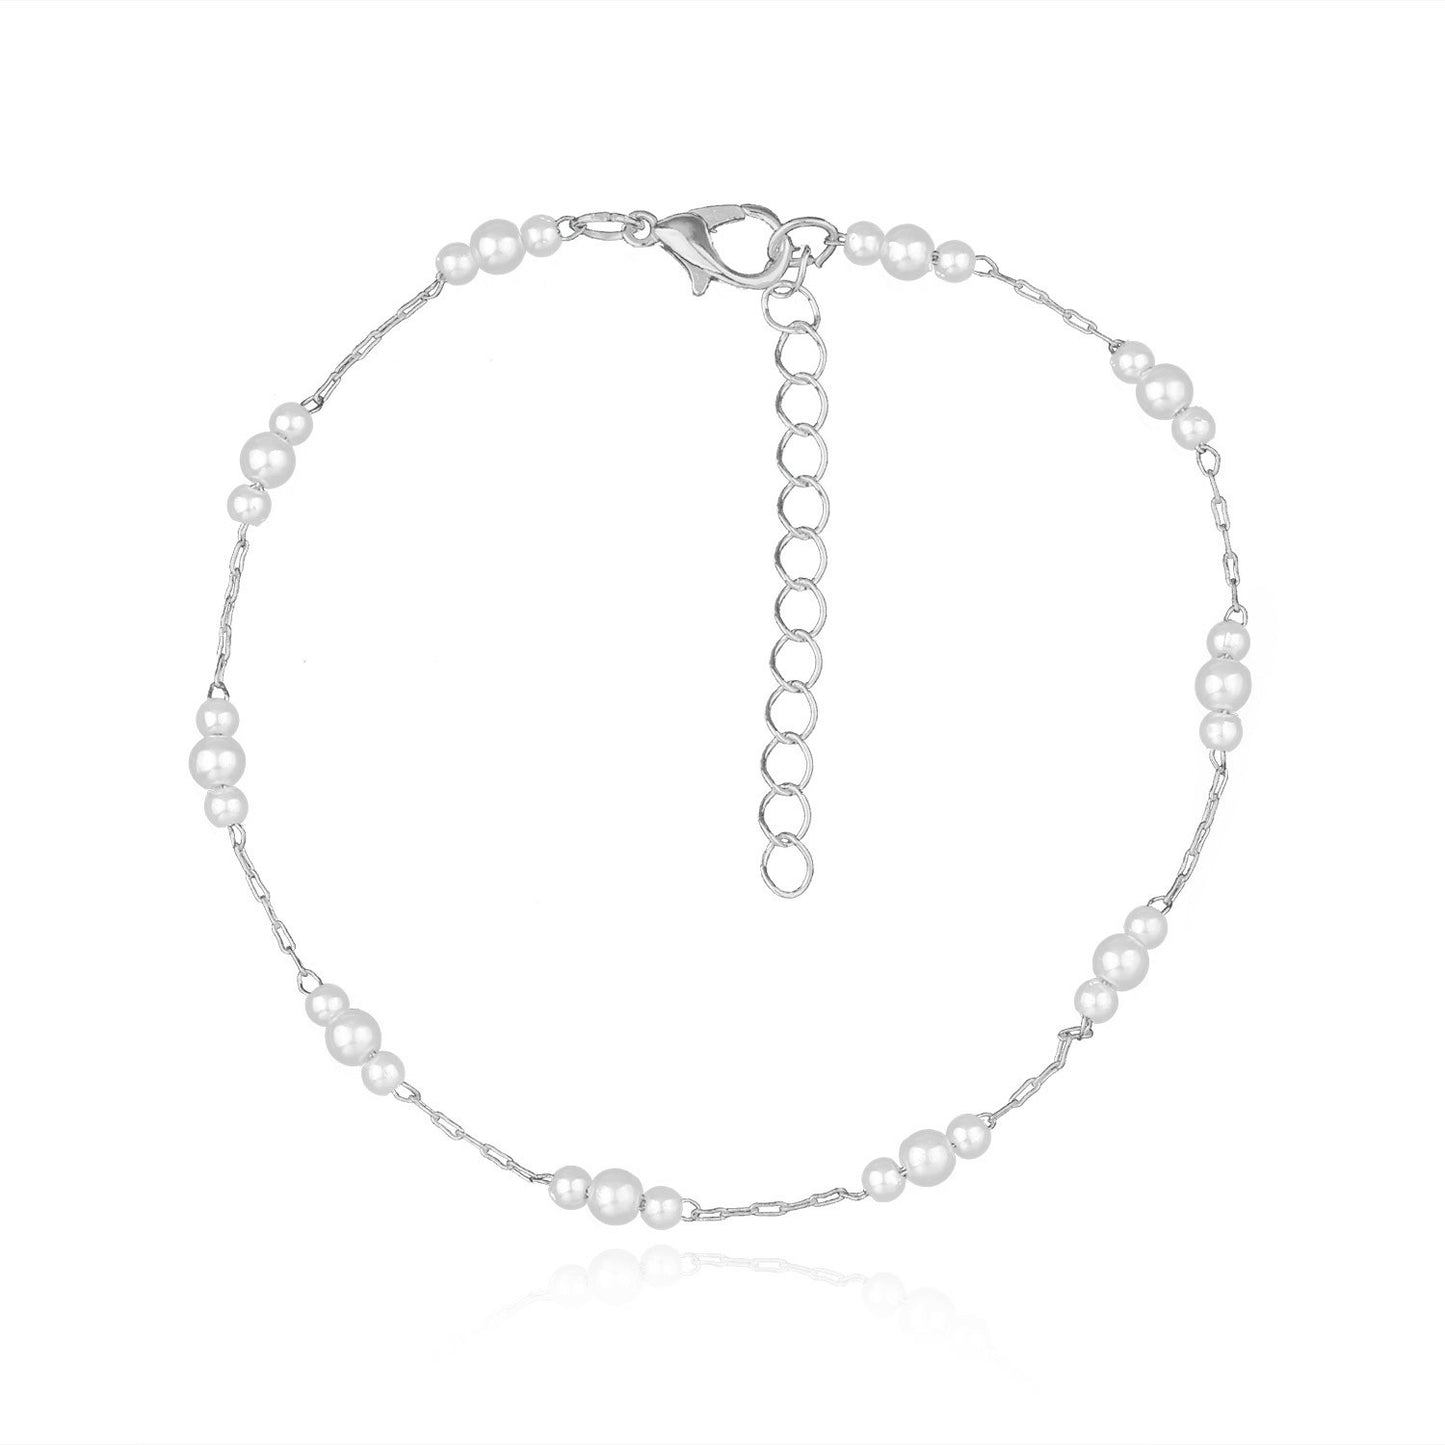 Imitation Pearls Beaded Anklet for Women